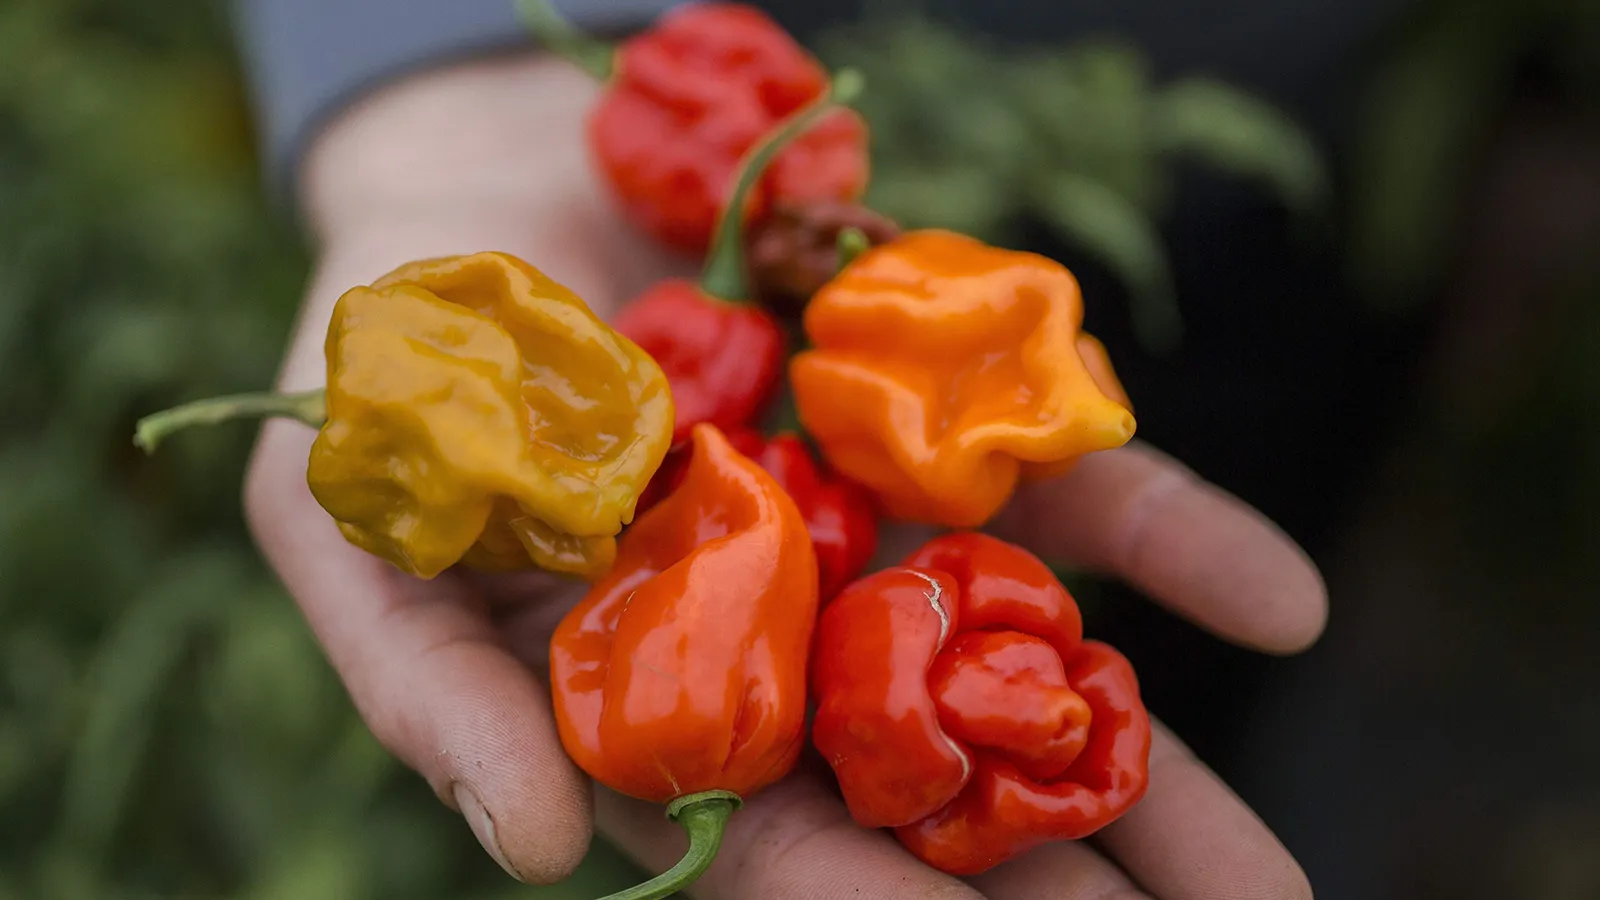 The Sizzle on the Hottest Pepper